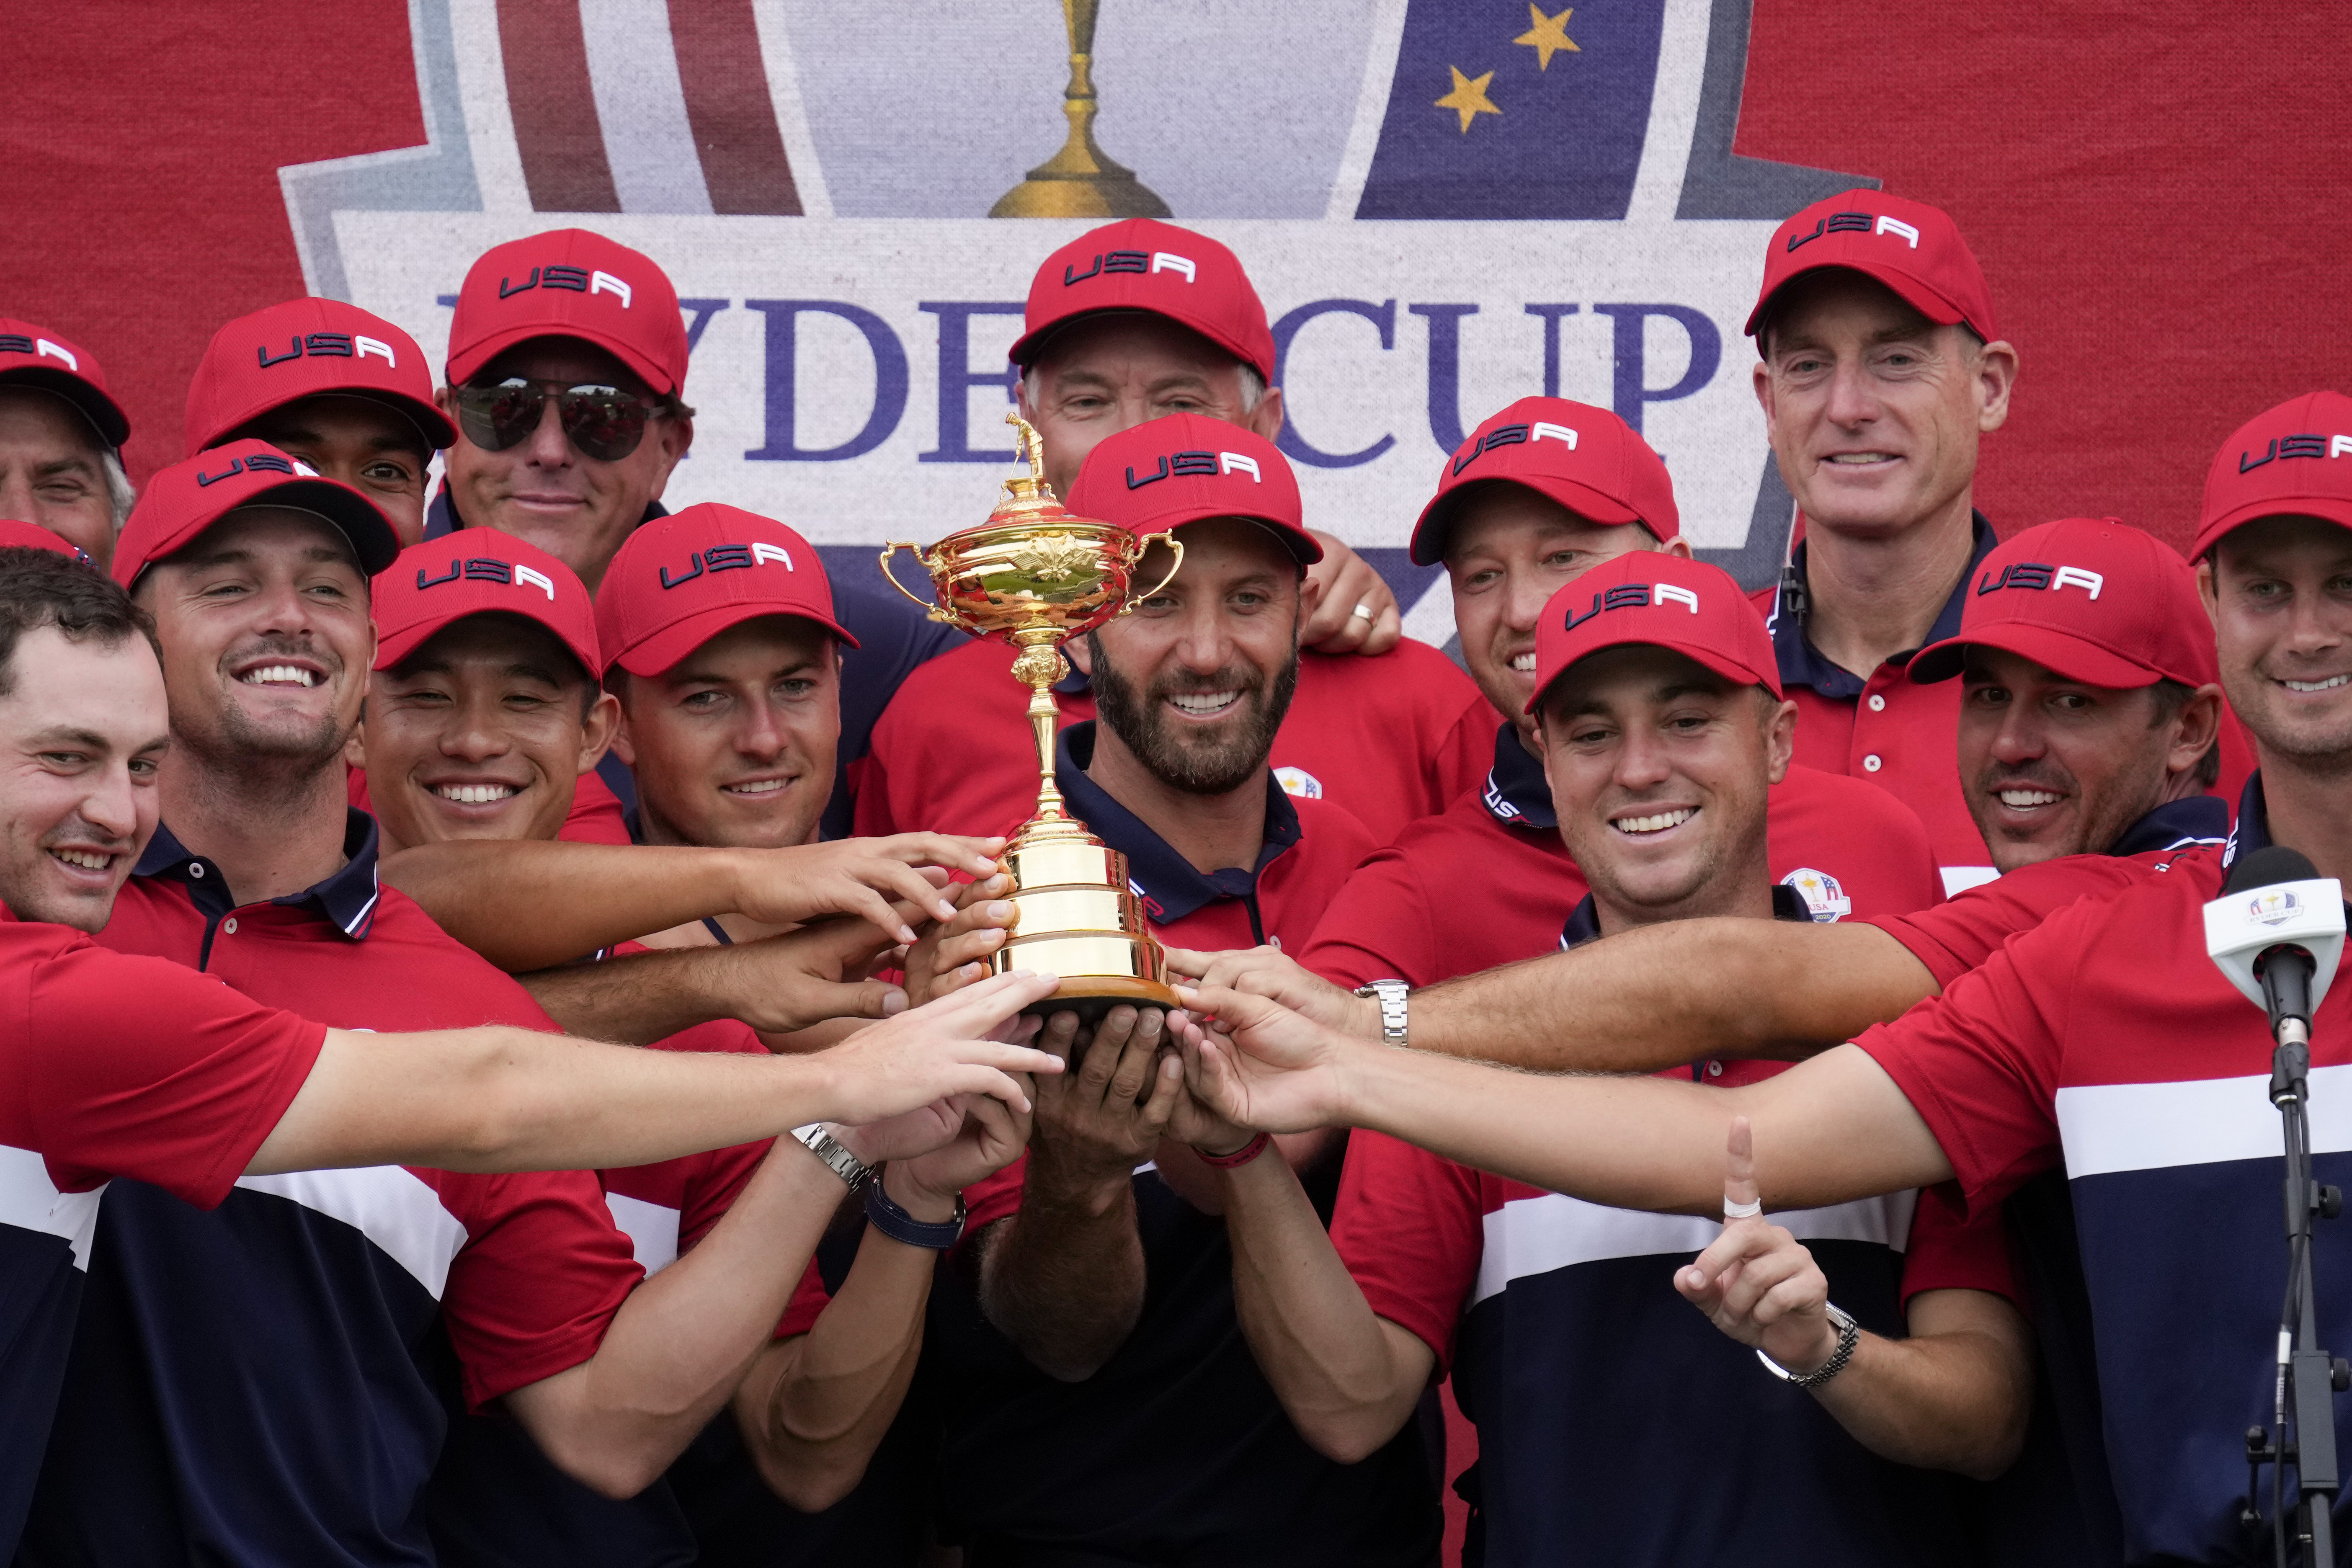 There are timely wins, and then there's what this Ryder Cup hopeful pulled  off at the Italian Open, Golf News and Tour Information